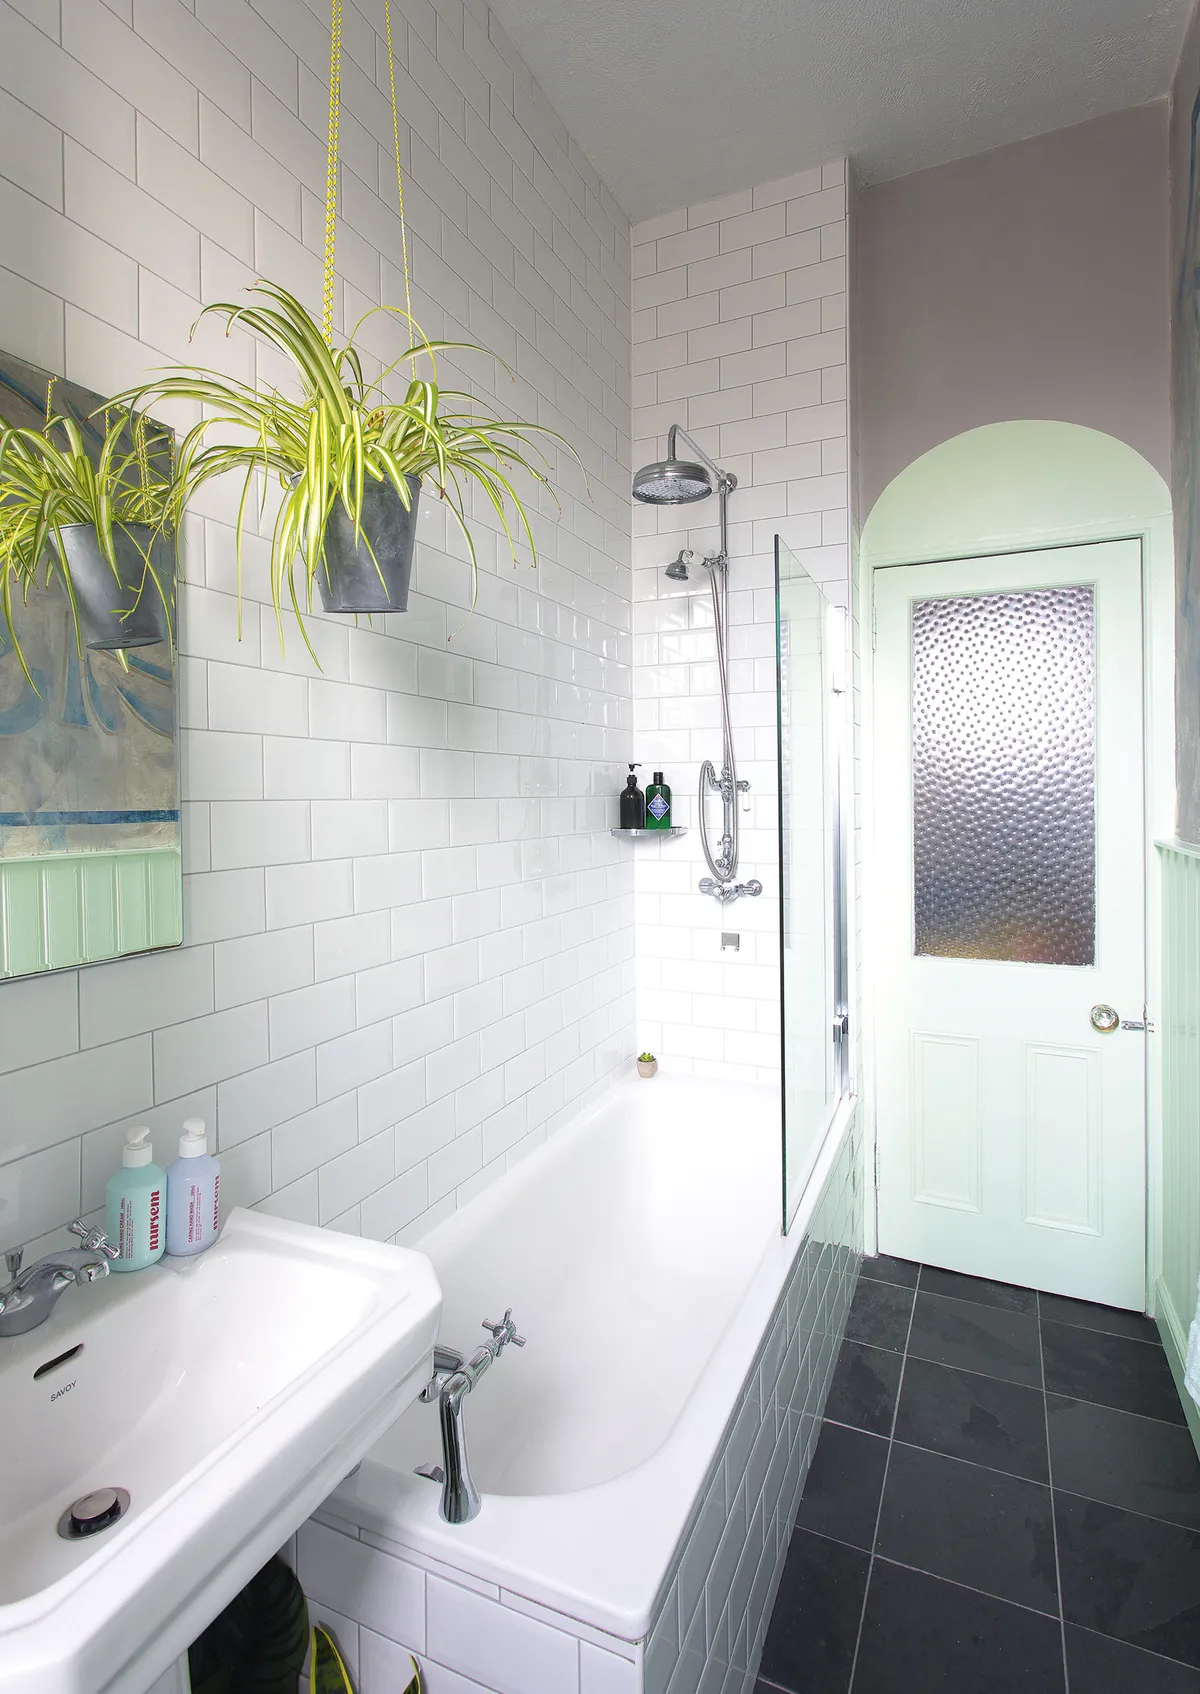 ‘To add colour to the all-white bathroom suite, I painted the panelling in Mint Gel by Leyland. I also painted the door frame the same spearmint shade, painting an archway around it for added interest’